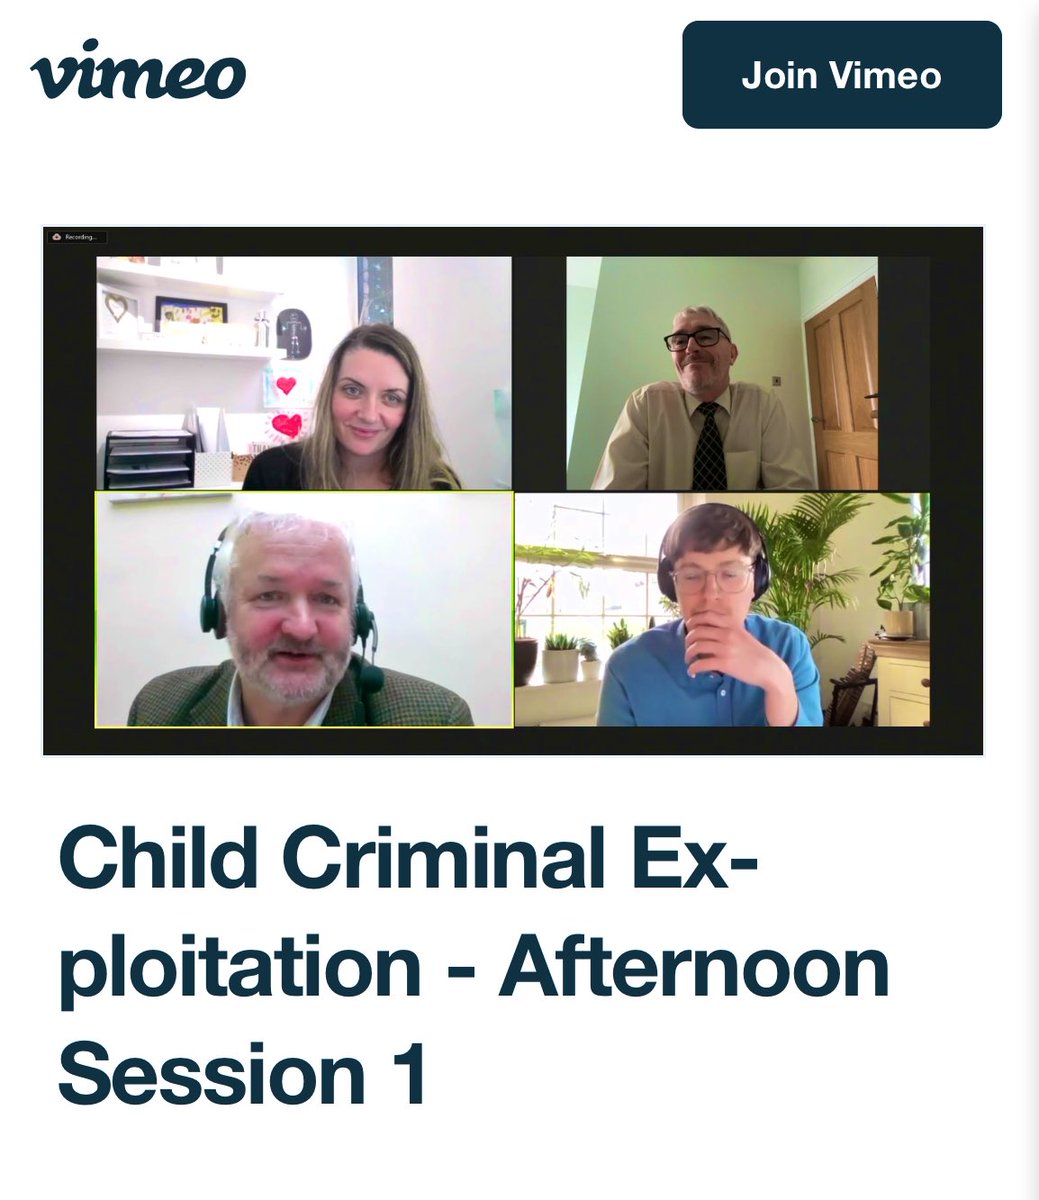 Just been sent the recording of our panel discussion from @GovtEvents #CCE #ChildCriminalExploitation conference with @EvanJonesCCE & @paceukinfo Much preferred this approach of sharing key findings compared with std PowerPoint presentation: #Vimeo vimeo.com/644758771/296f…